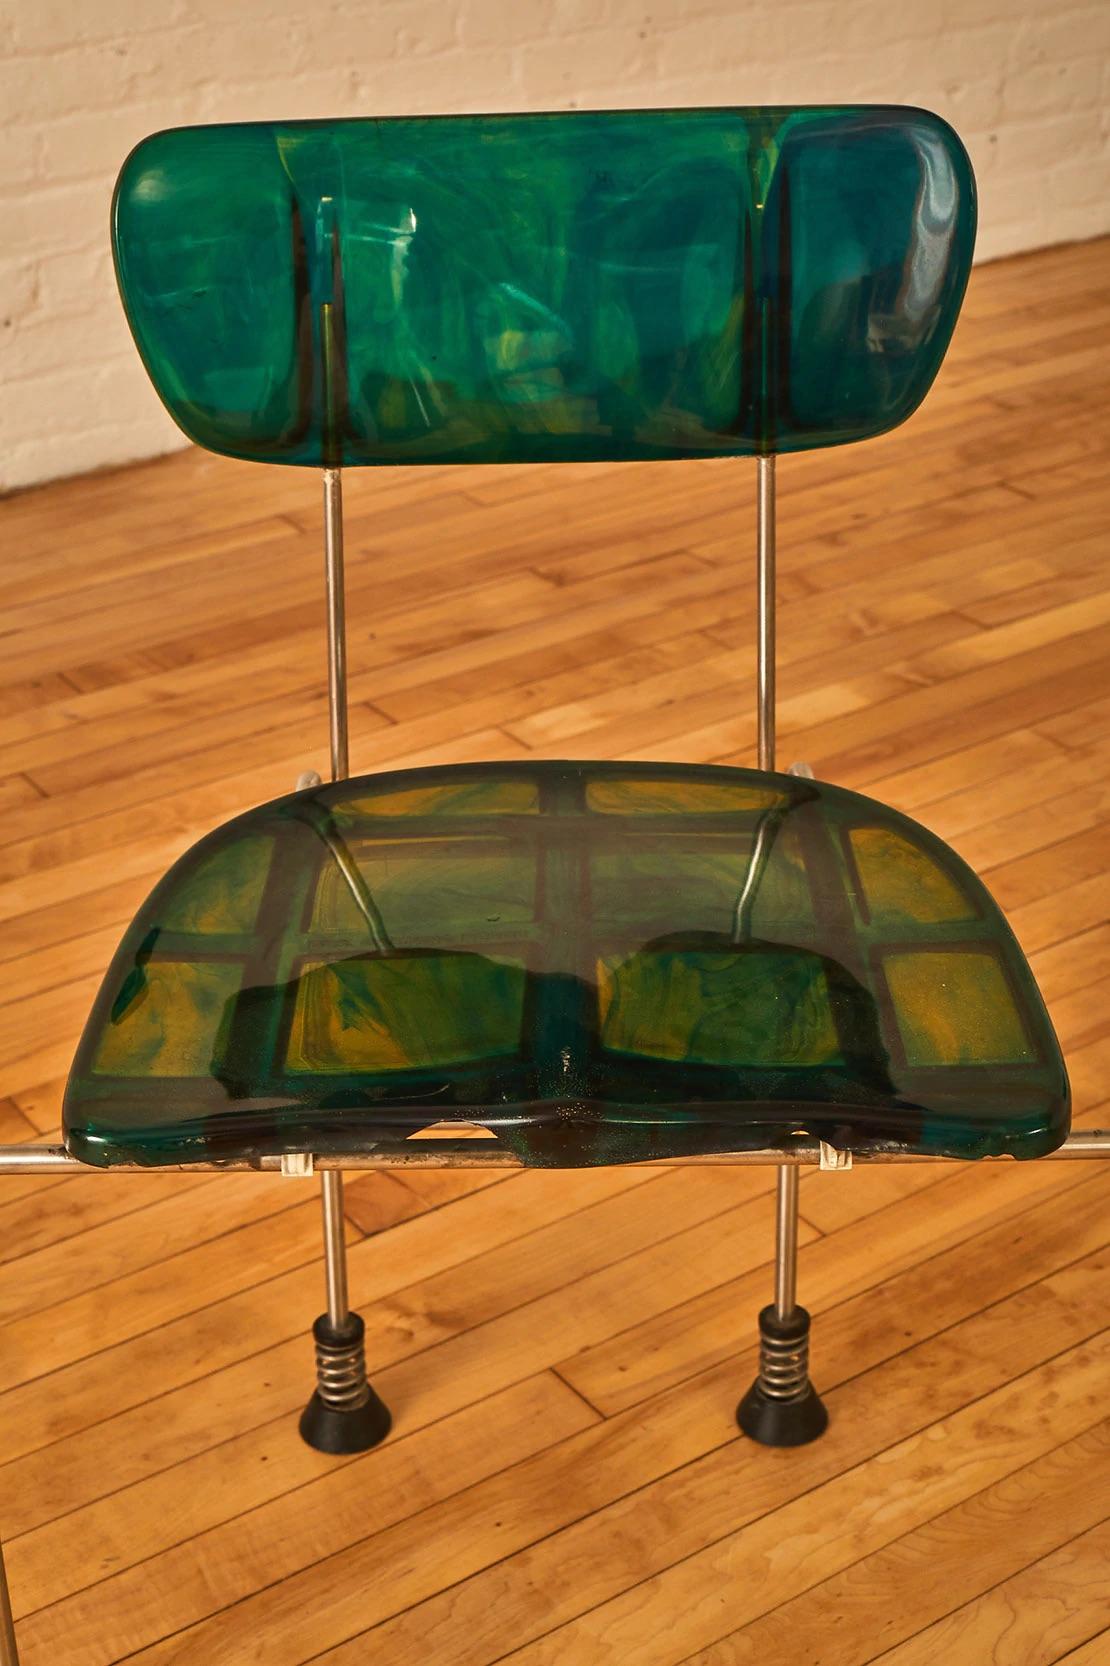 Sculptural broadway chair designed by Gaetano Pesce for Bernini. Each chair features a marble green hue.Supported by flexible and dynamic brushed steel frame. The seat and back are cast in the Gaetano's signature resin. Finished with round spring